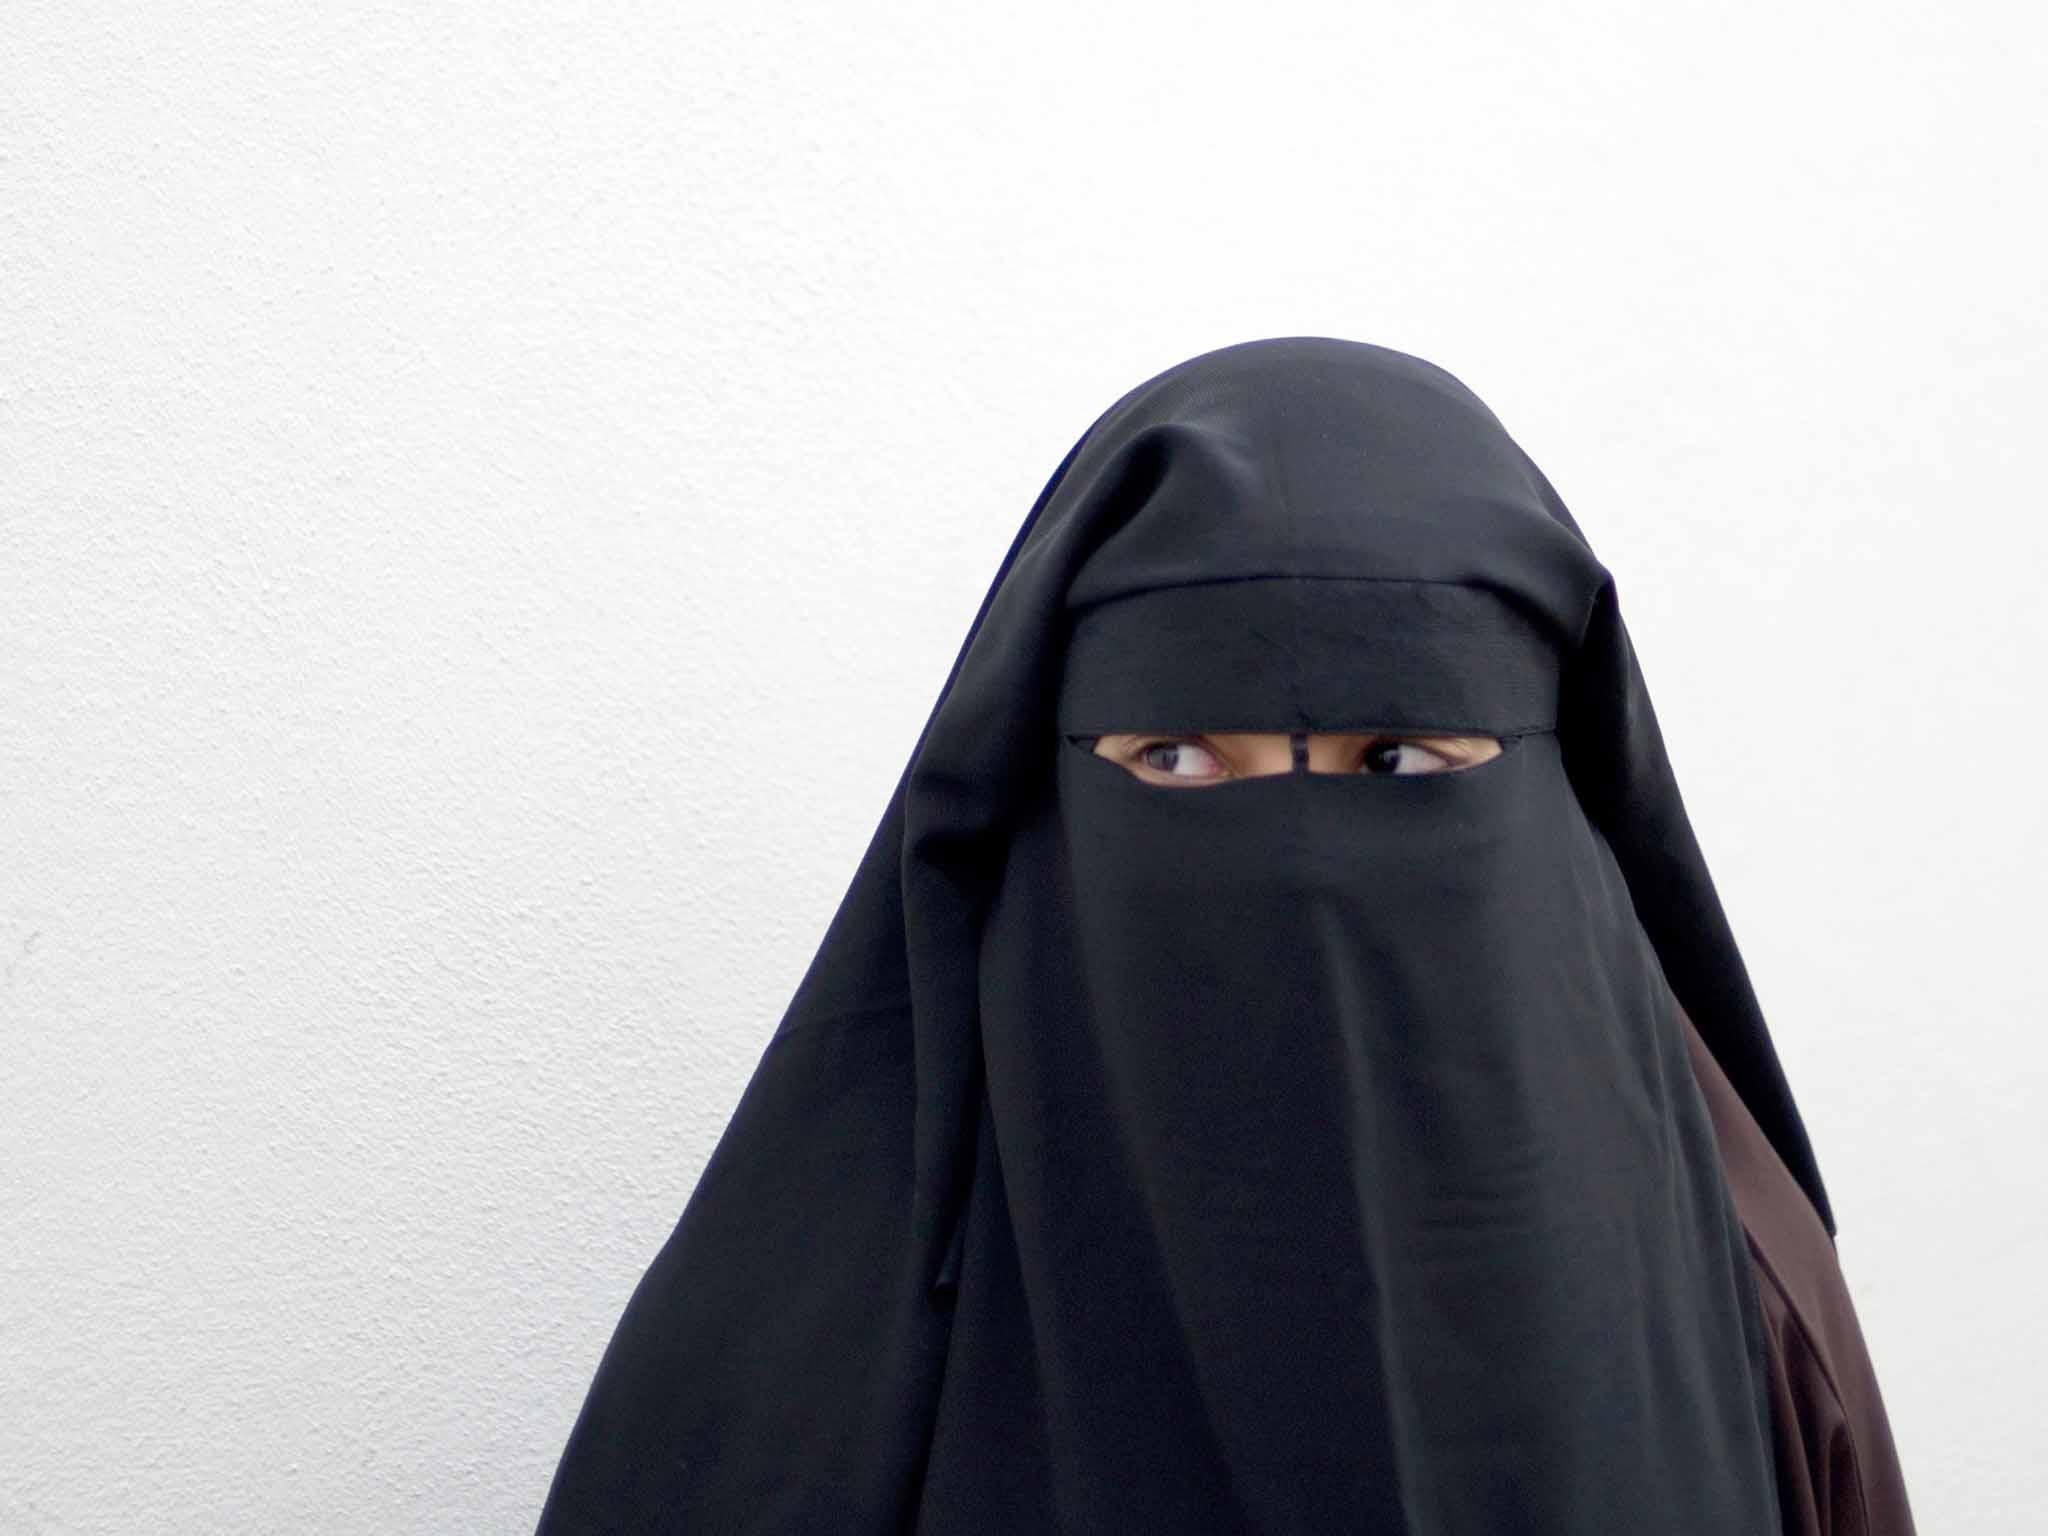 Muslim groups have condemned the law, saying just a tiny minority of Austrian Muslims — around 150 — wear full-face veils